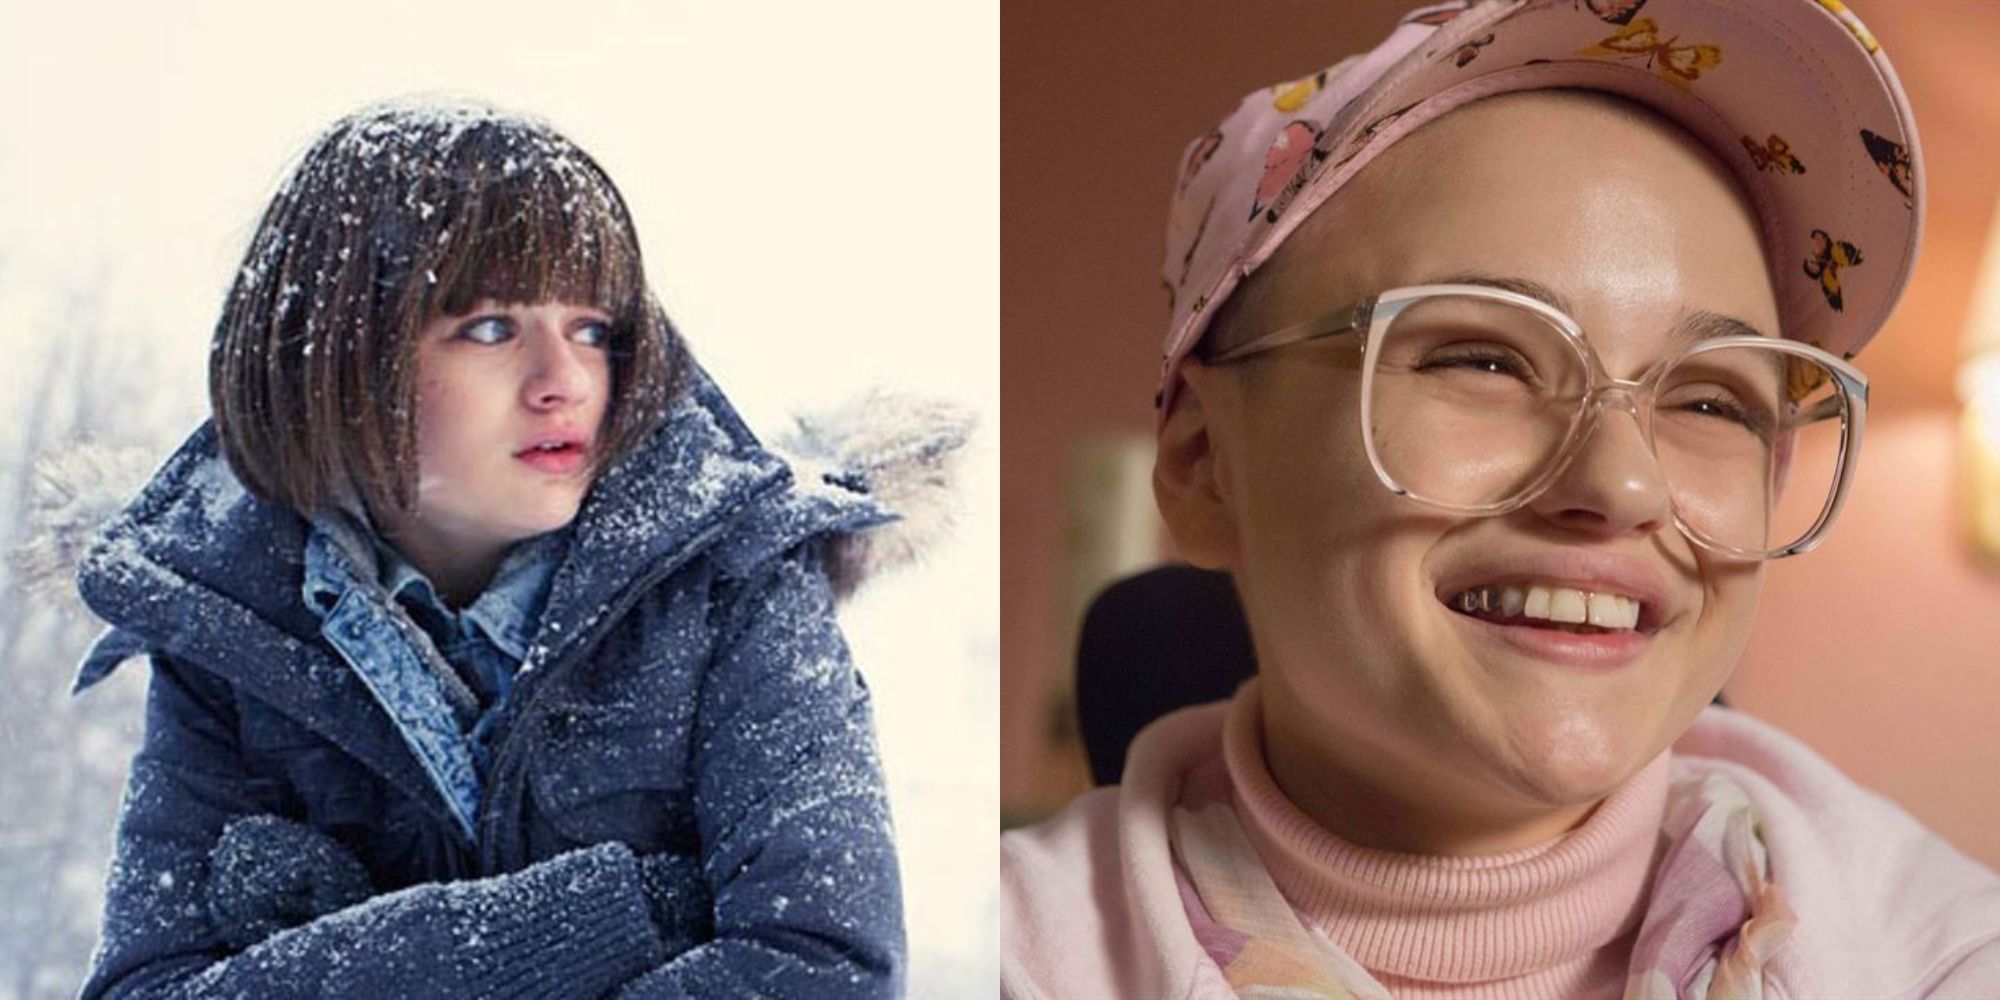 Split image showing Joey King in Fargo and The Act.